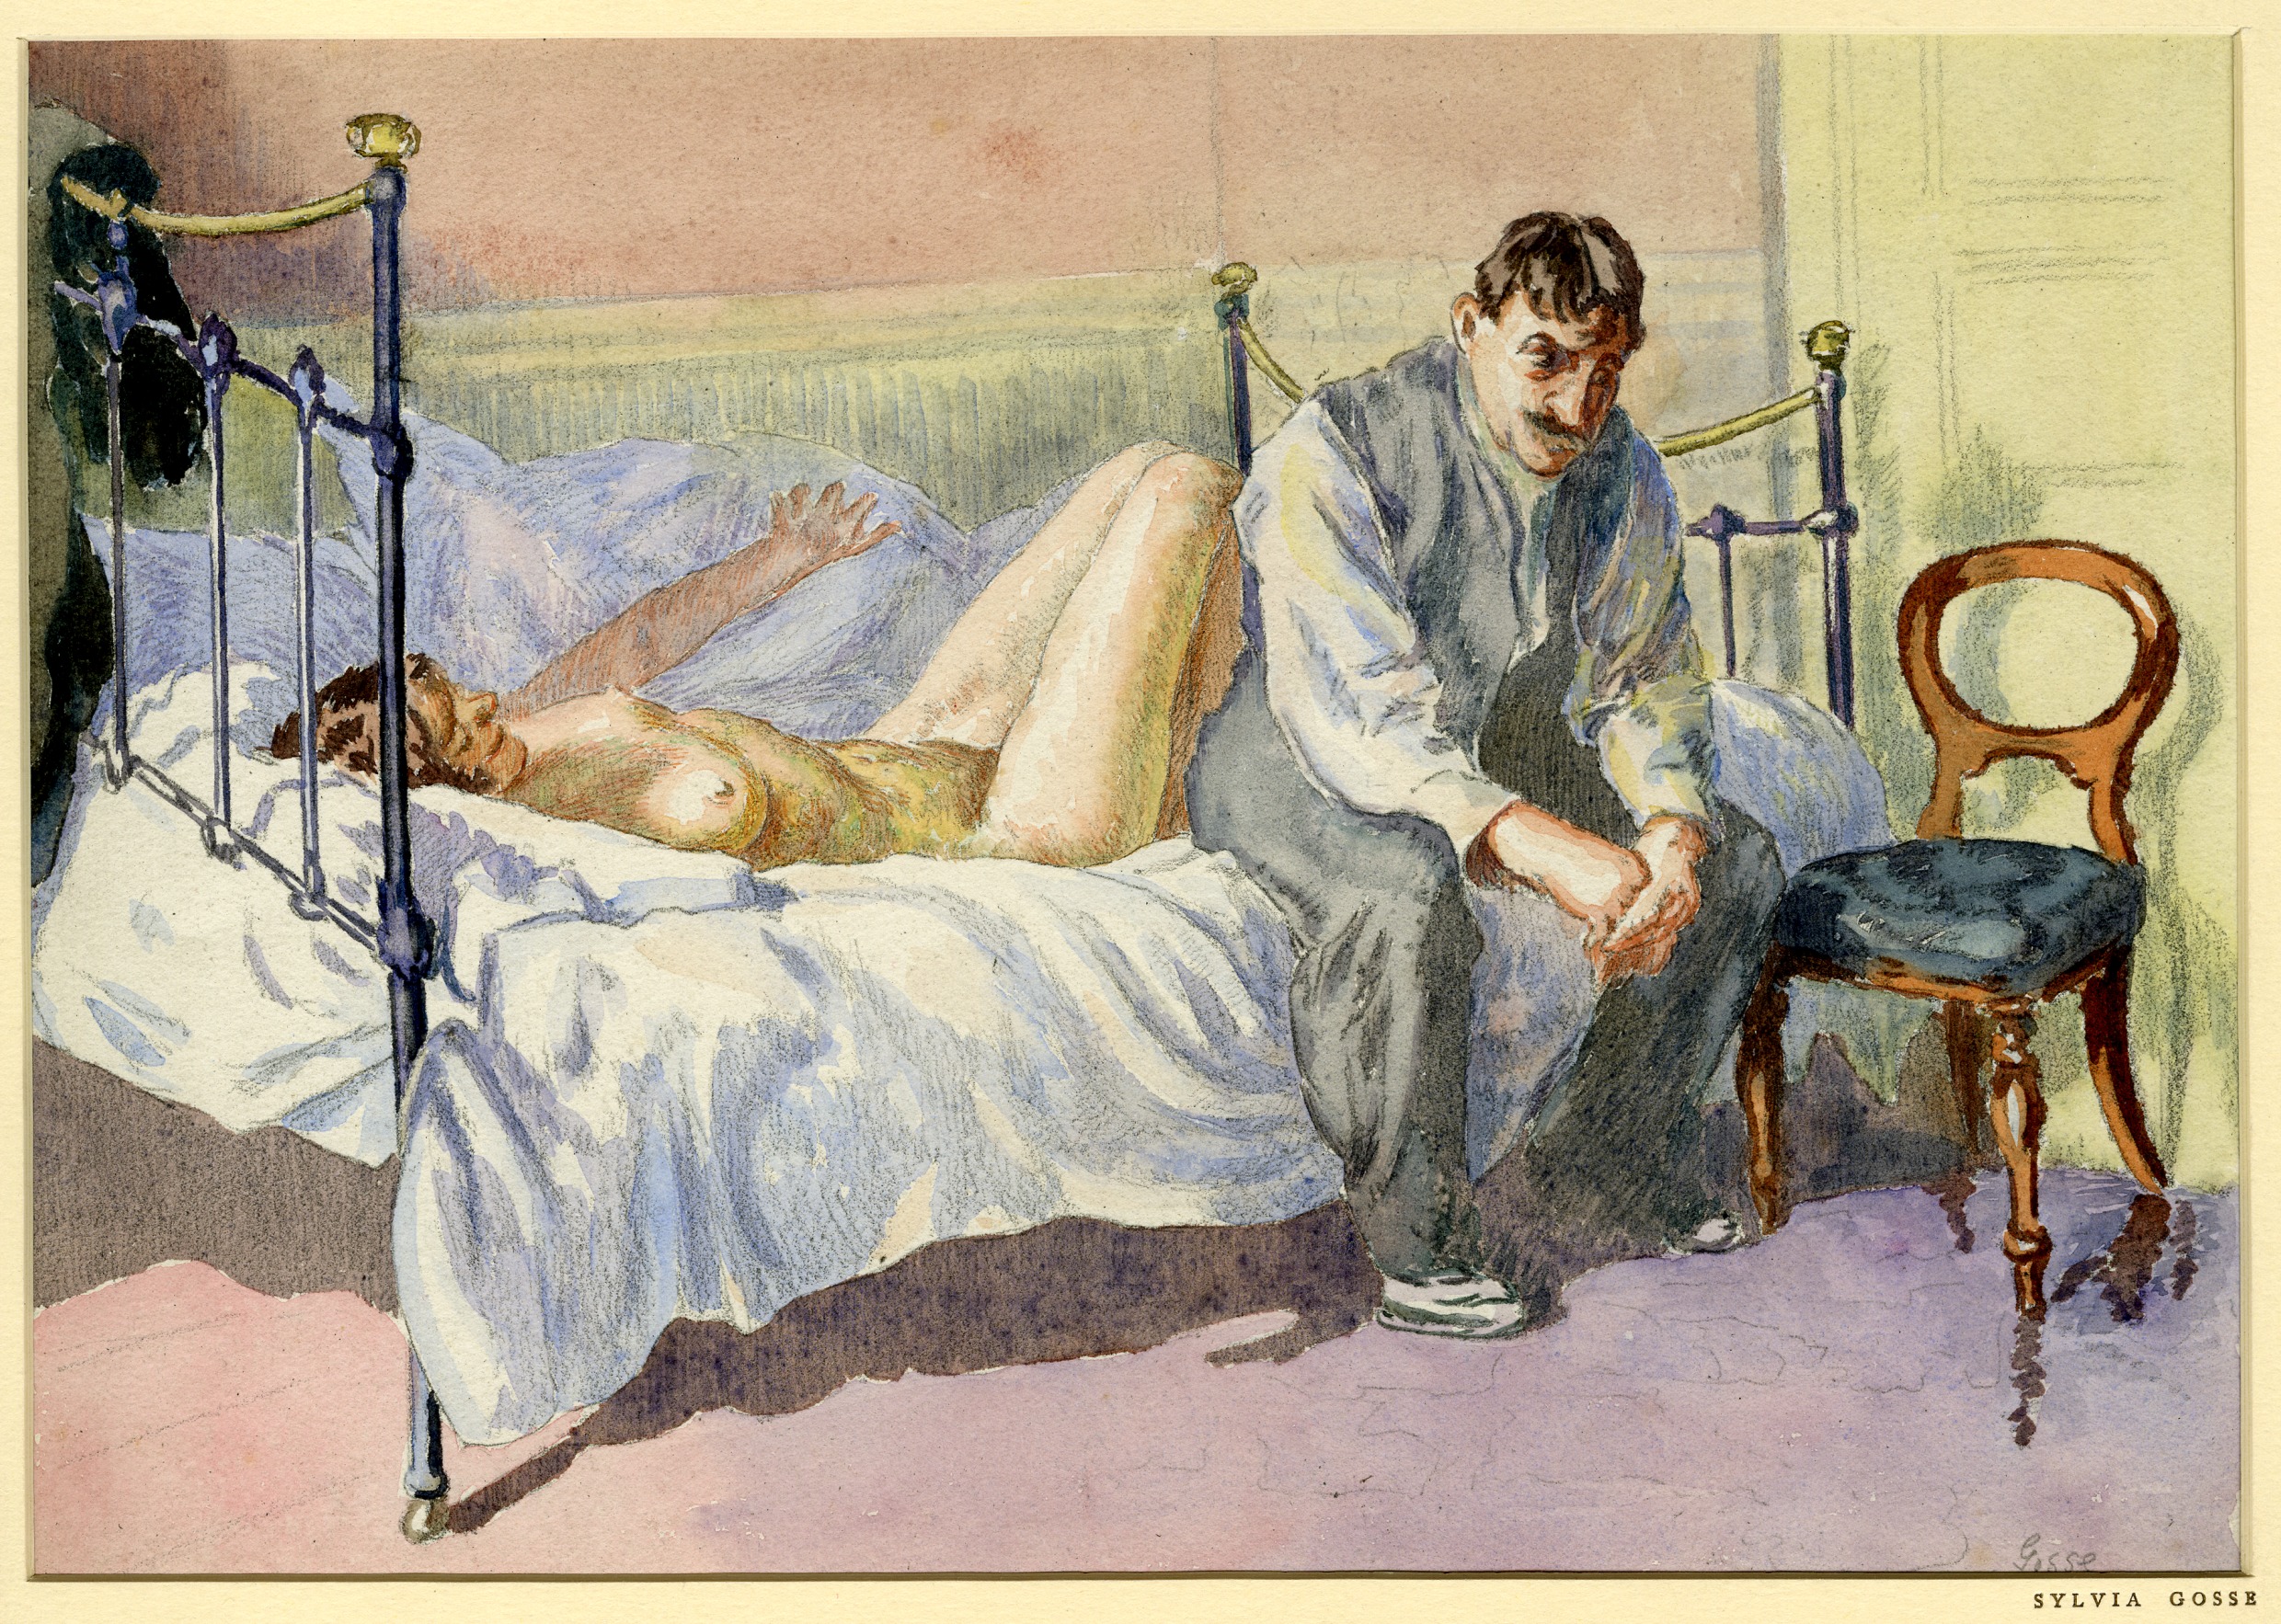 A female nude on a bed (circa 1925)